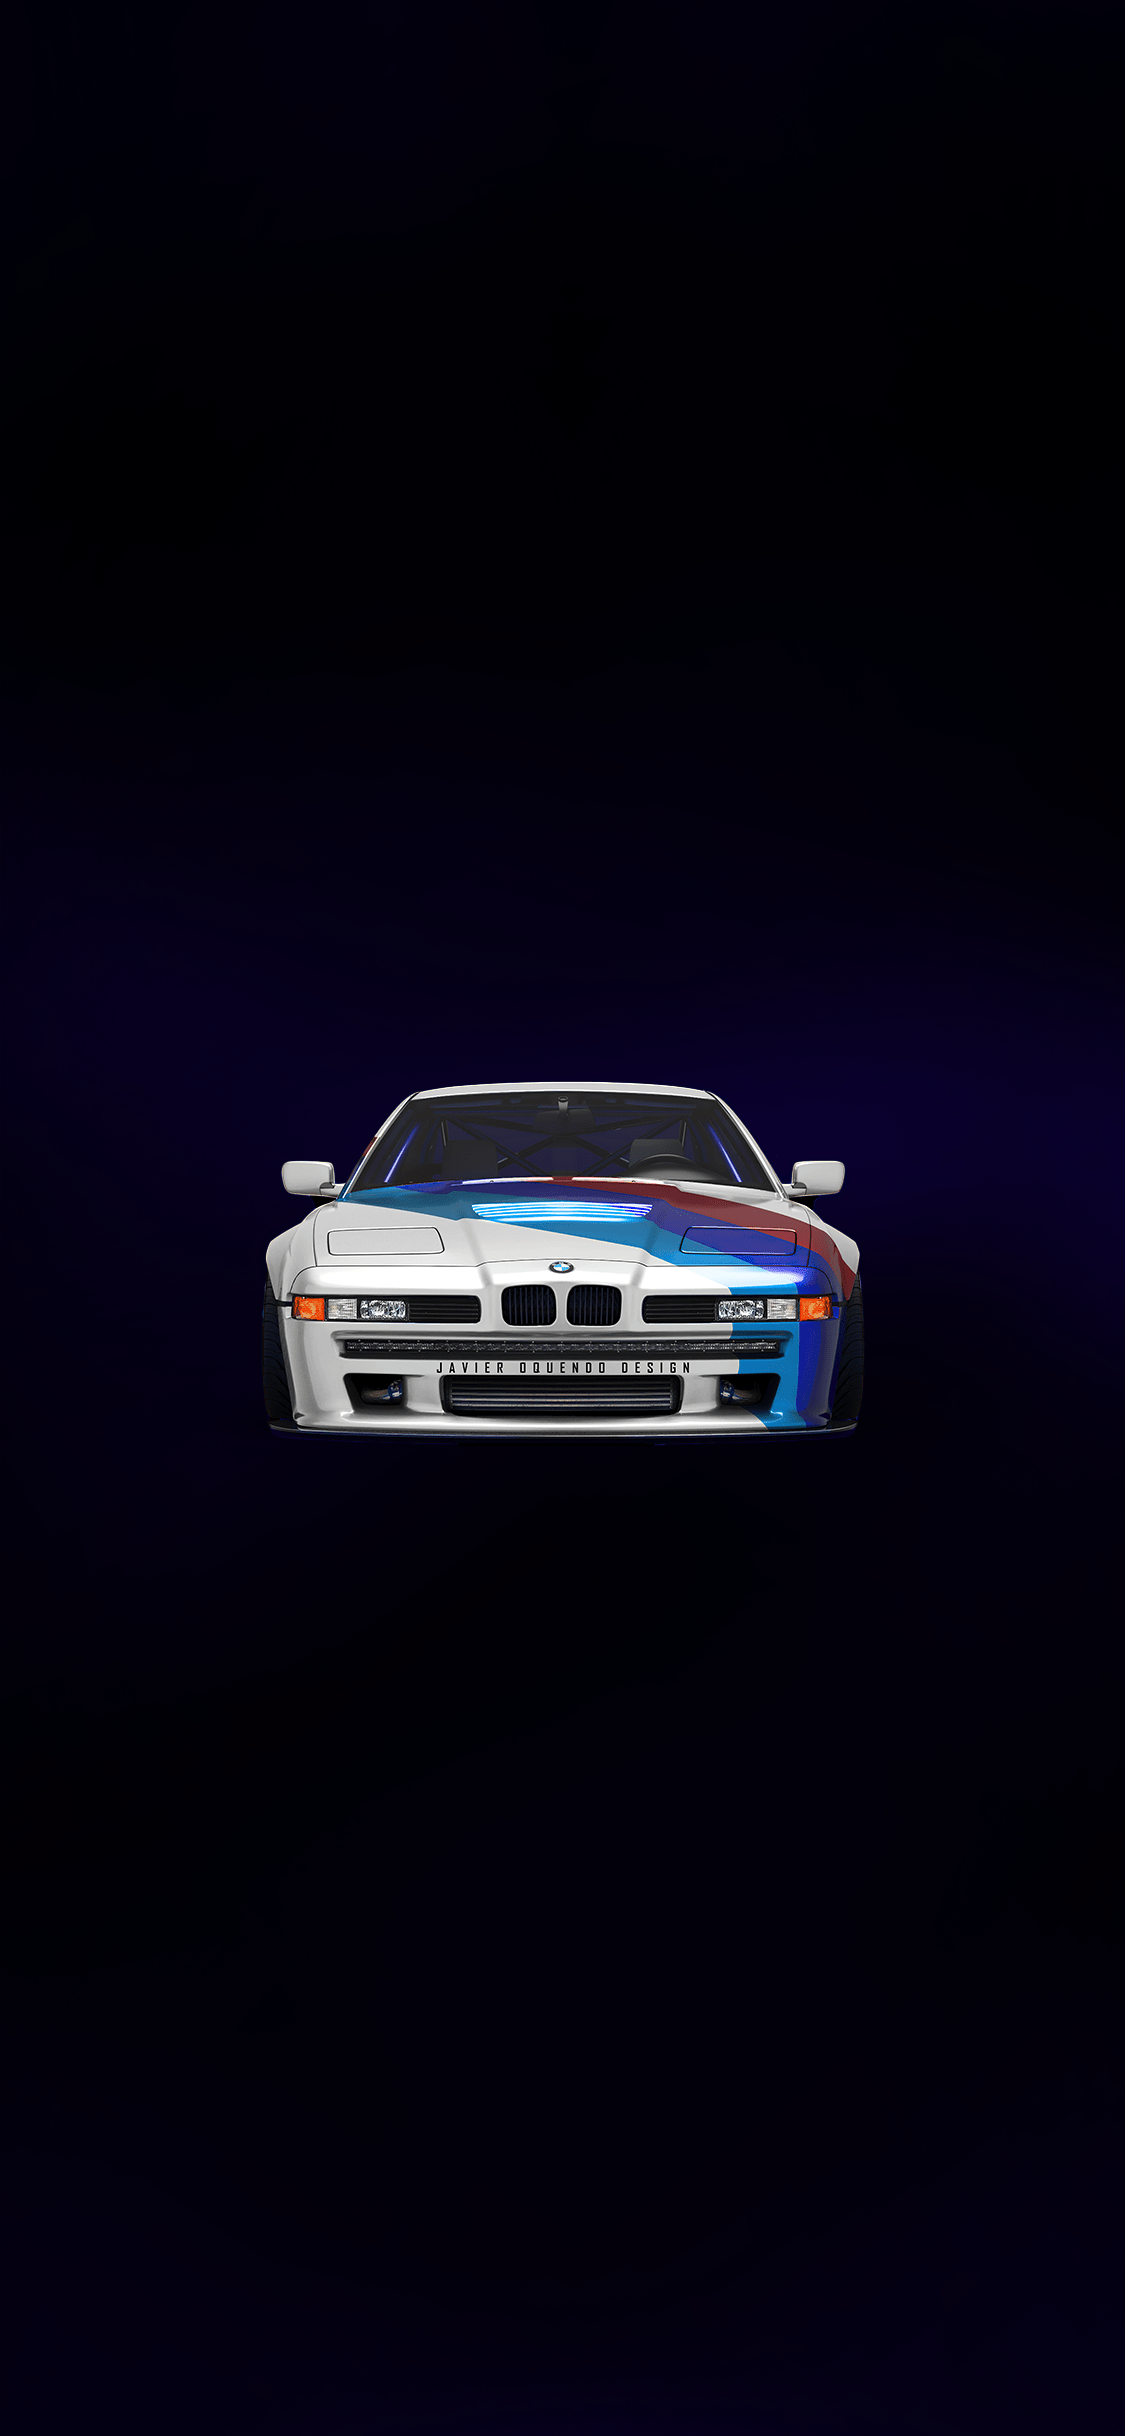 BMW M1 supercar from the 80s - BMW